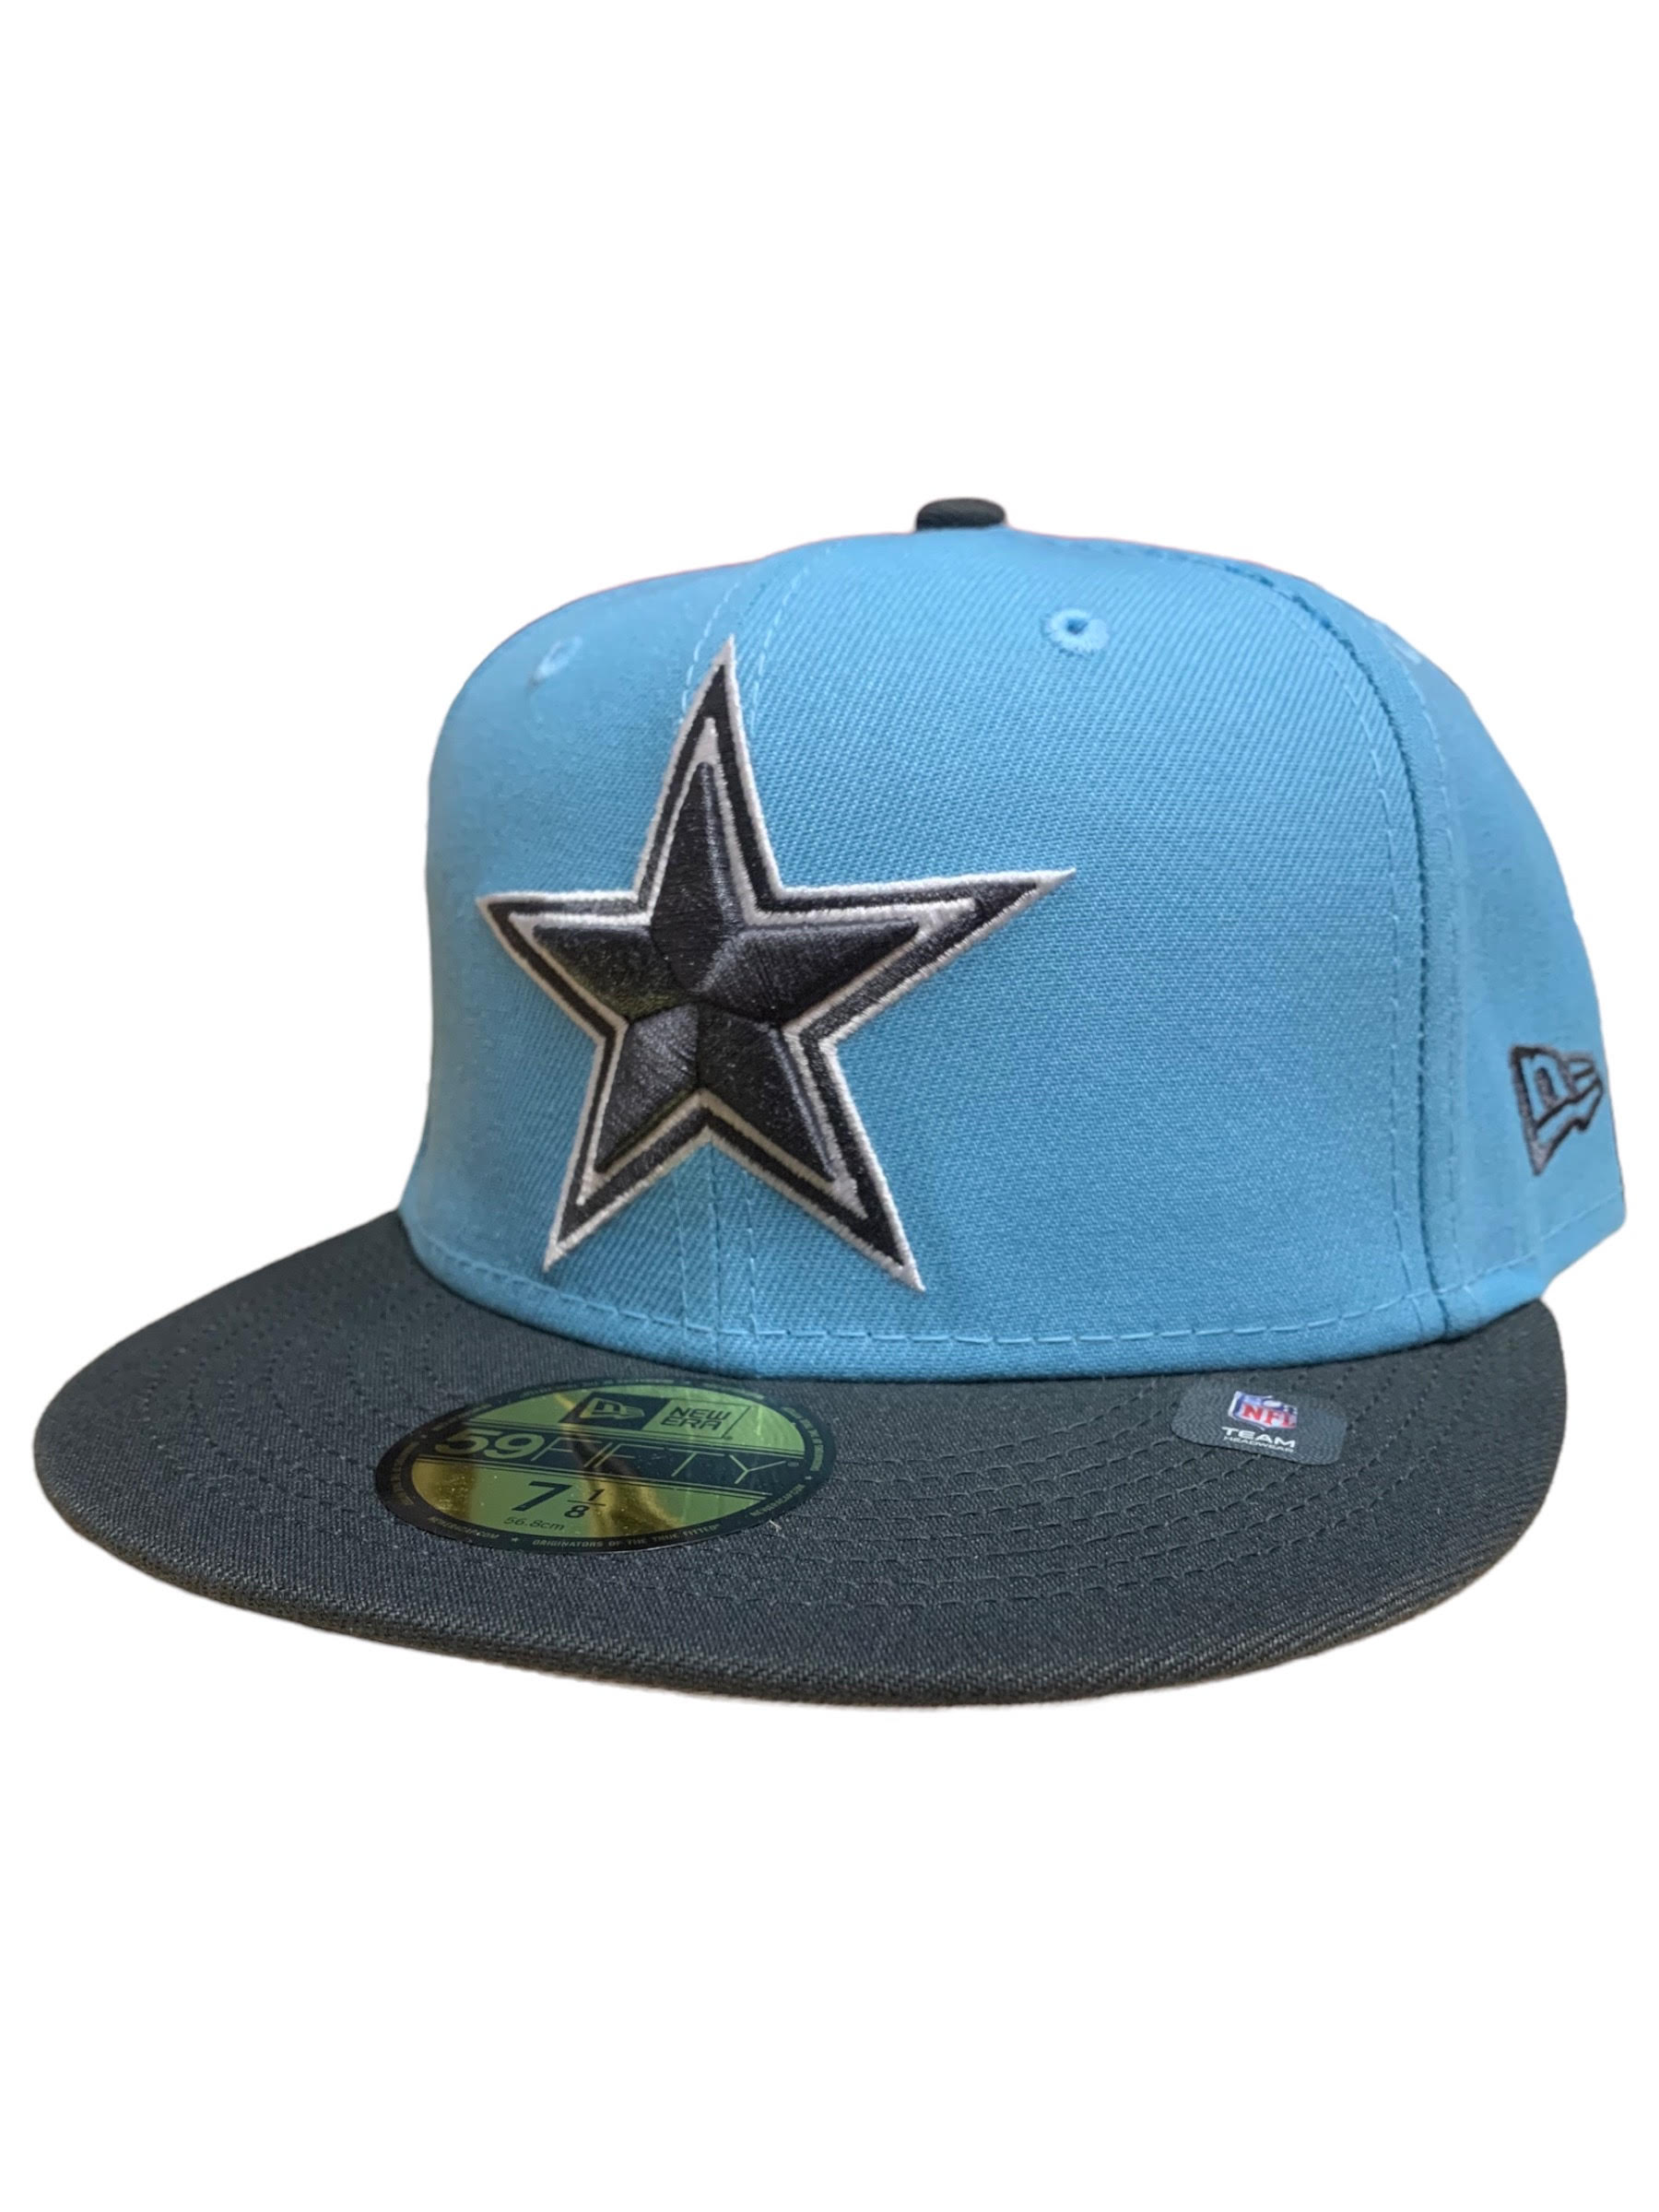 Dallas Cowboys 2-Tone Color Pack 59FIFTY Fitted Hat - Light Blue/ Charcoal 22 BLF/S / 7 3/8